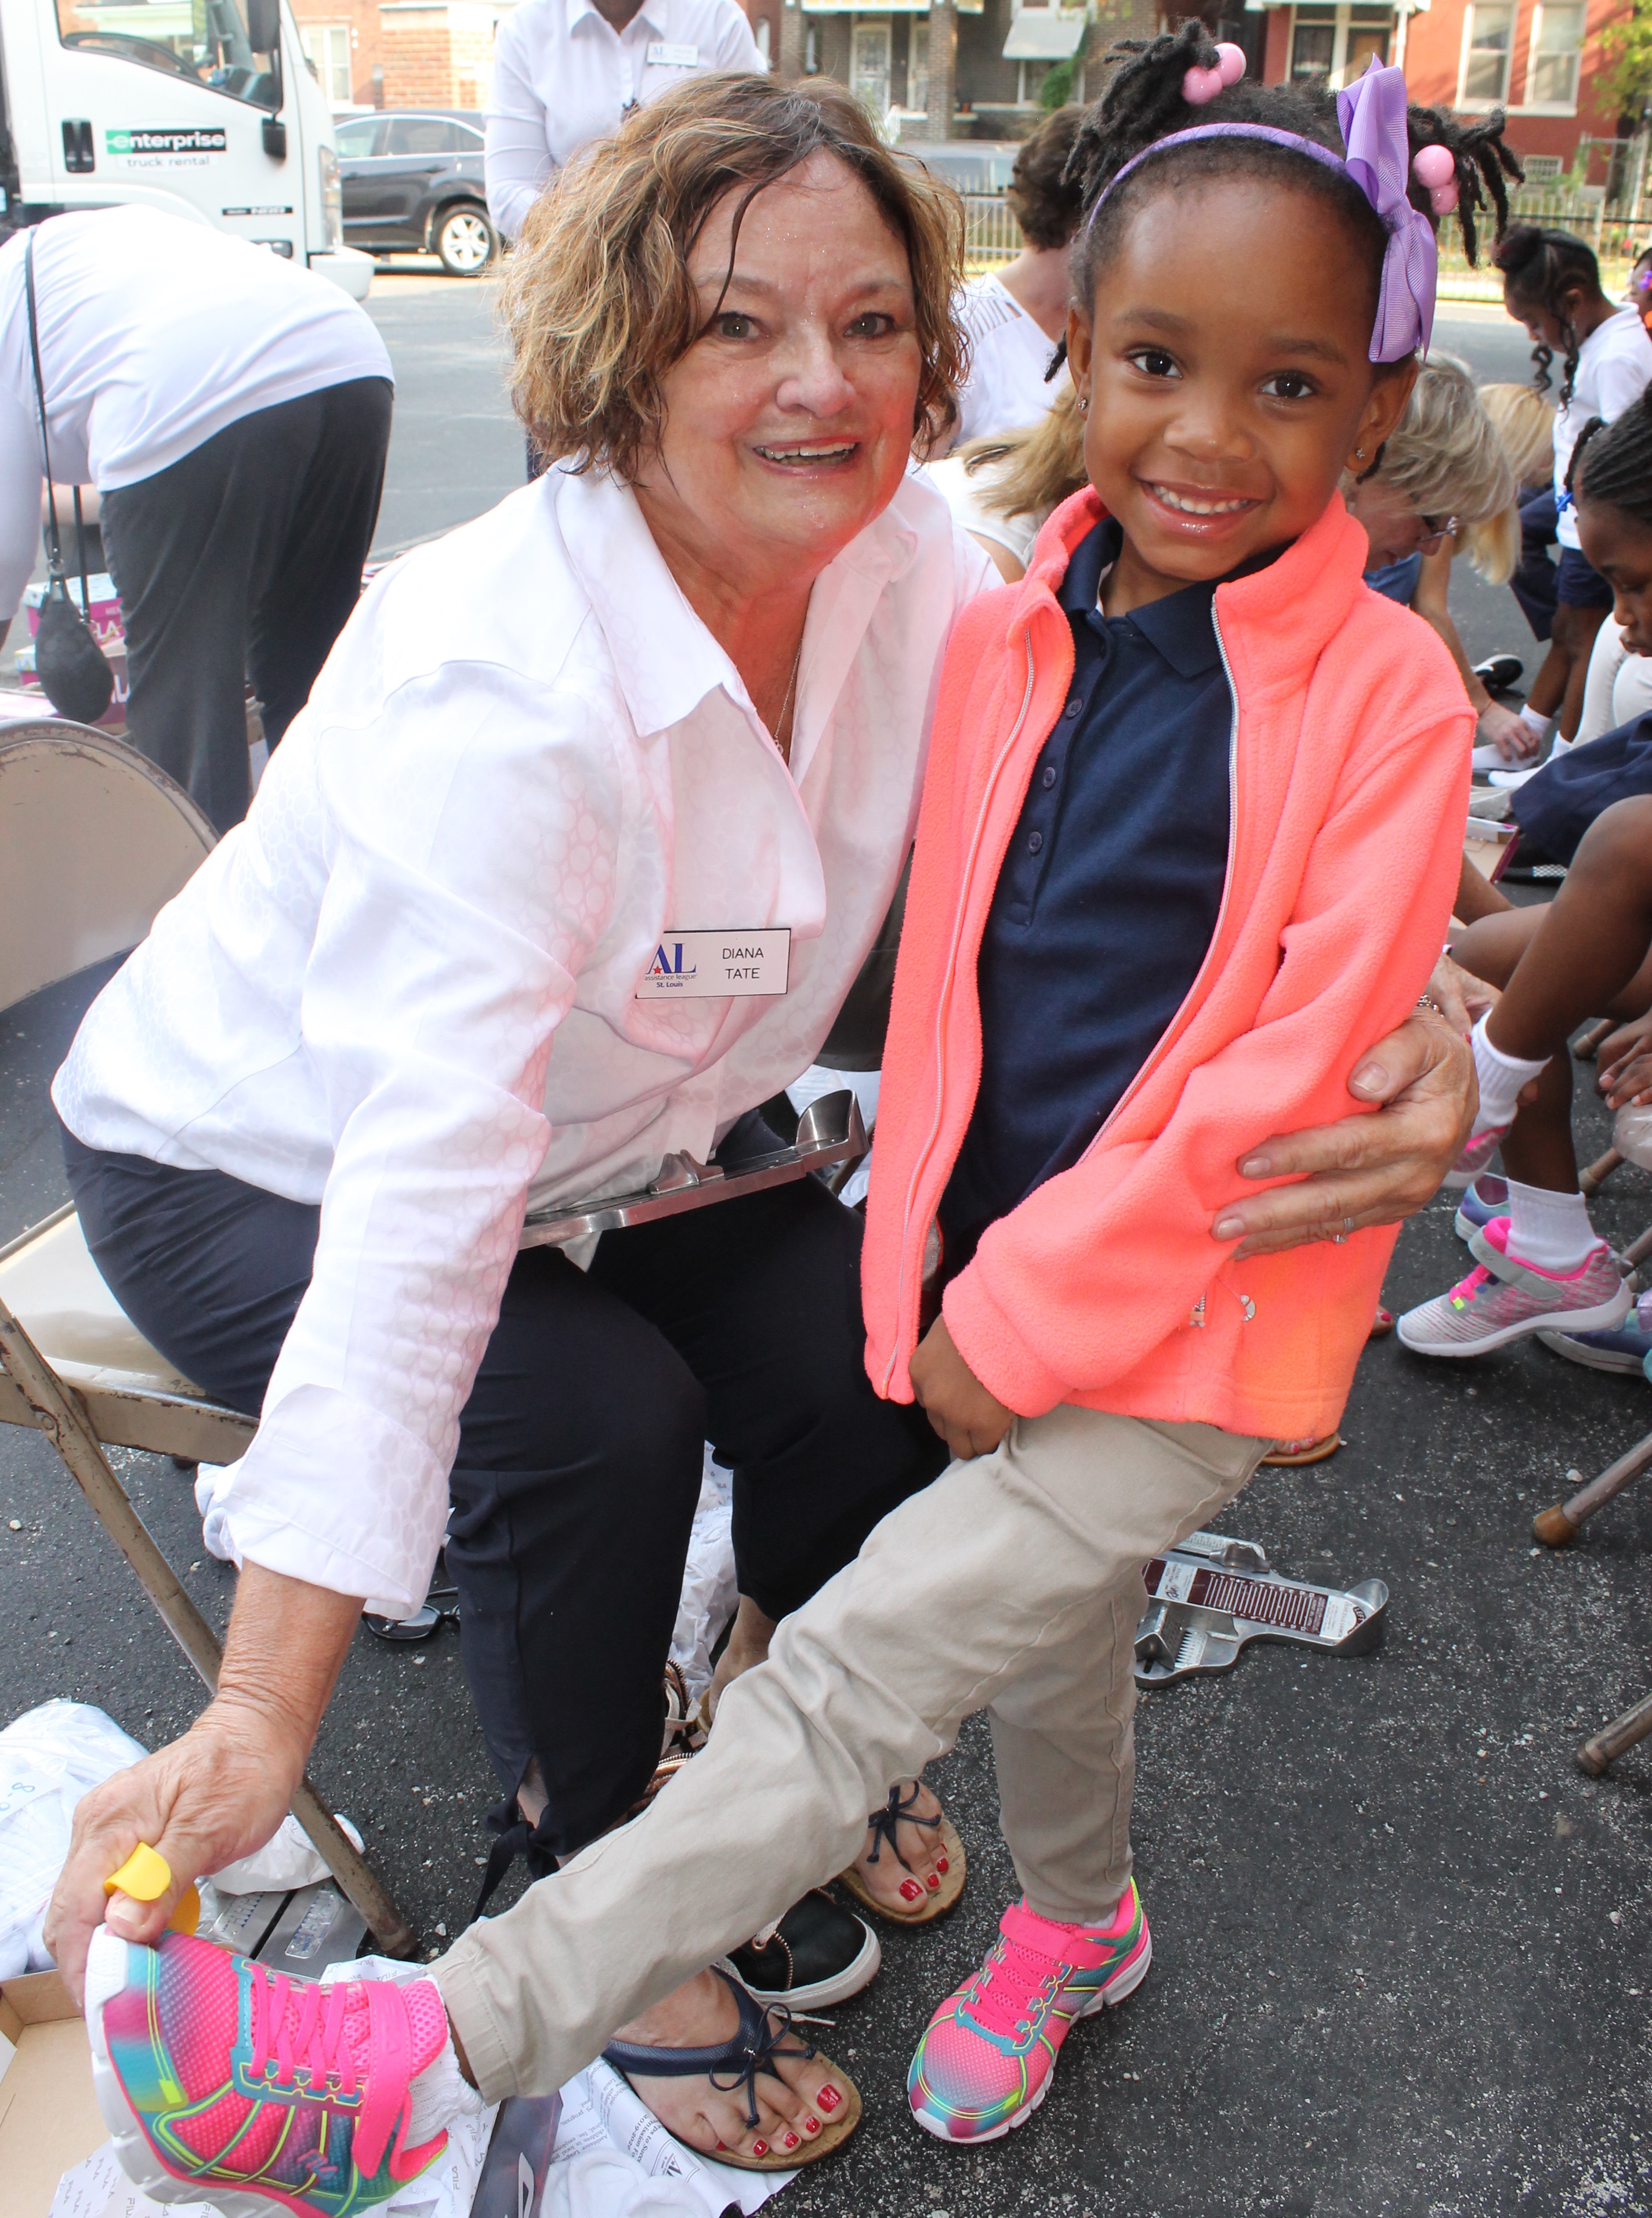 9 10 19 STEPS Diana Tate of Ballwin with Hamilton School kindergartener showing off her shoes